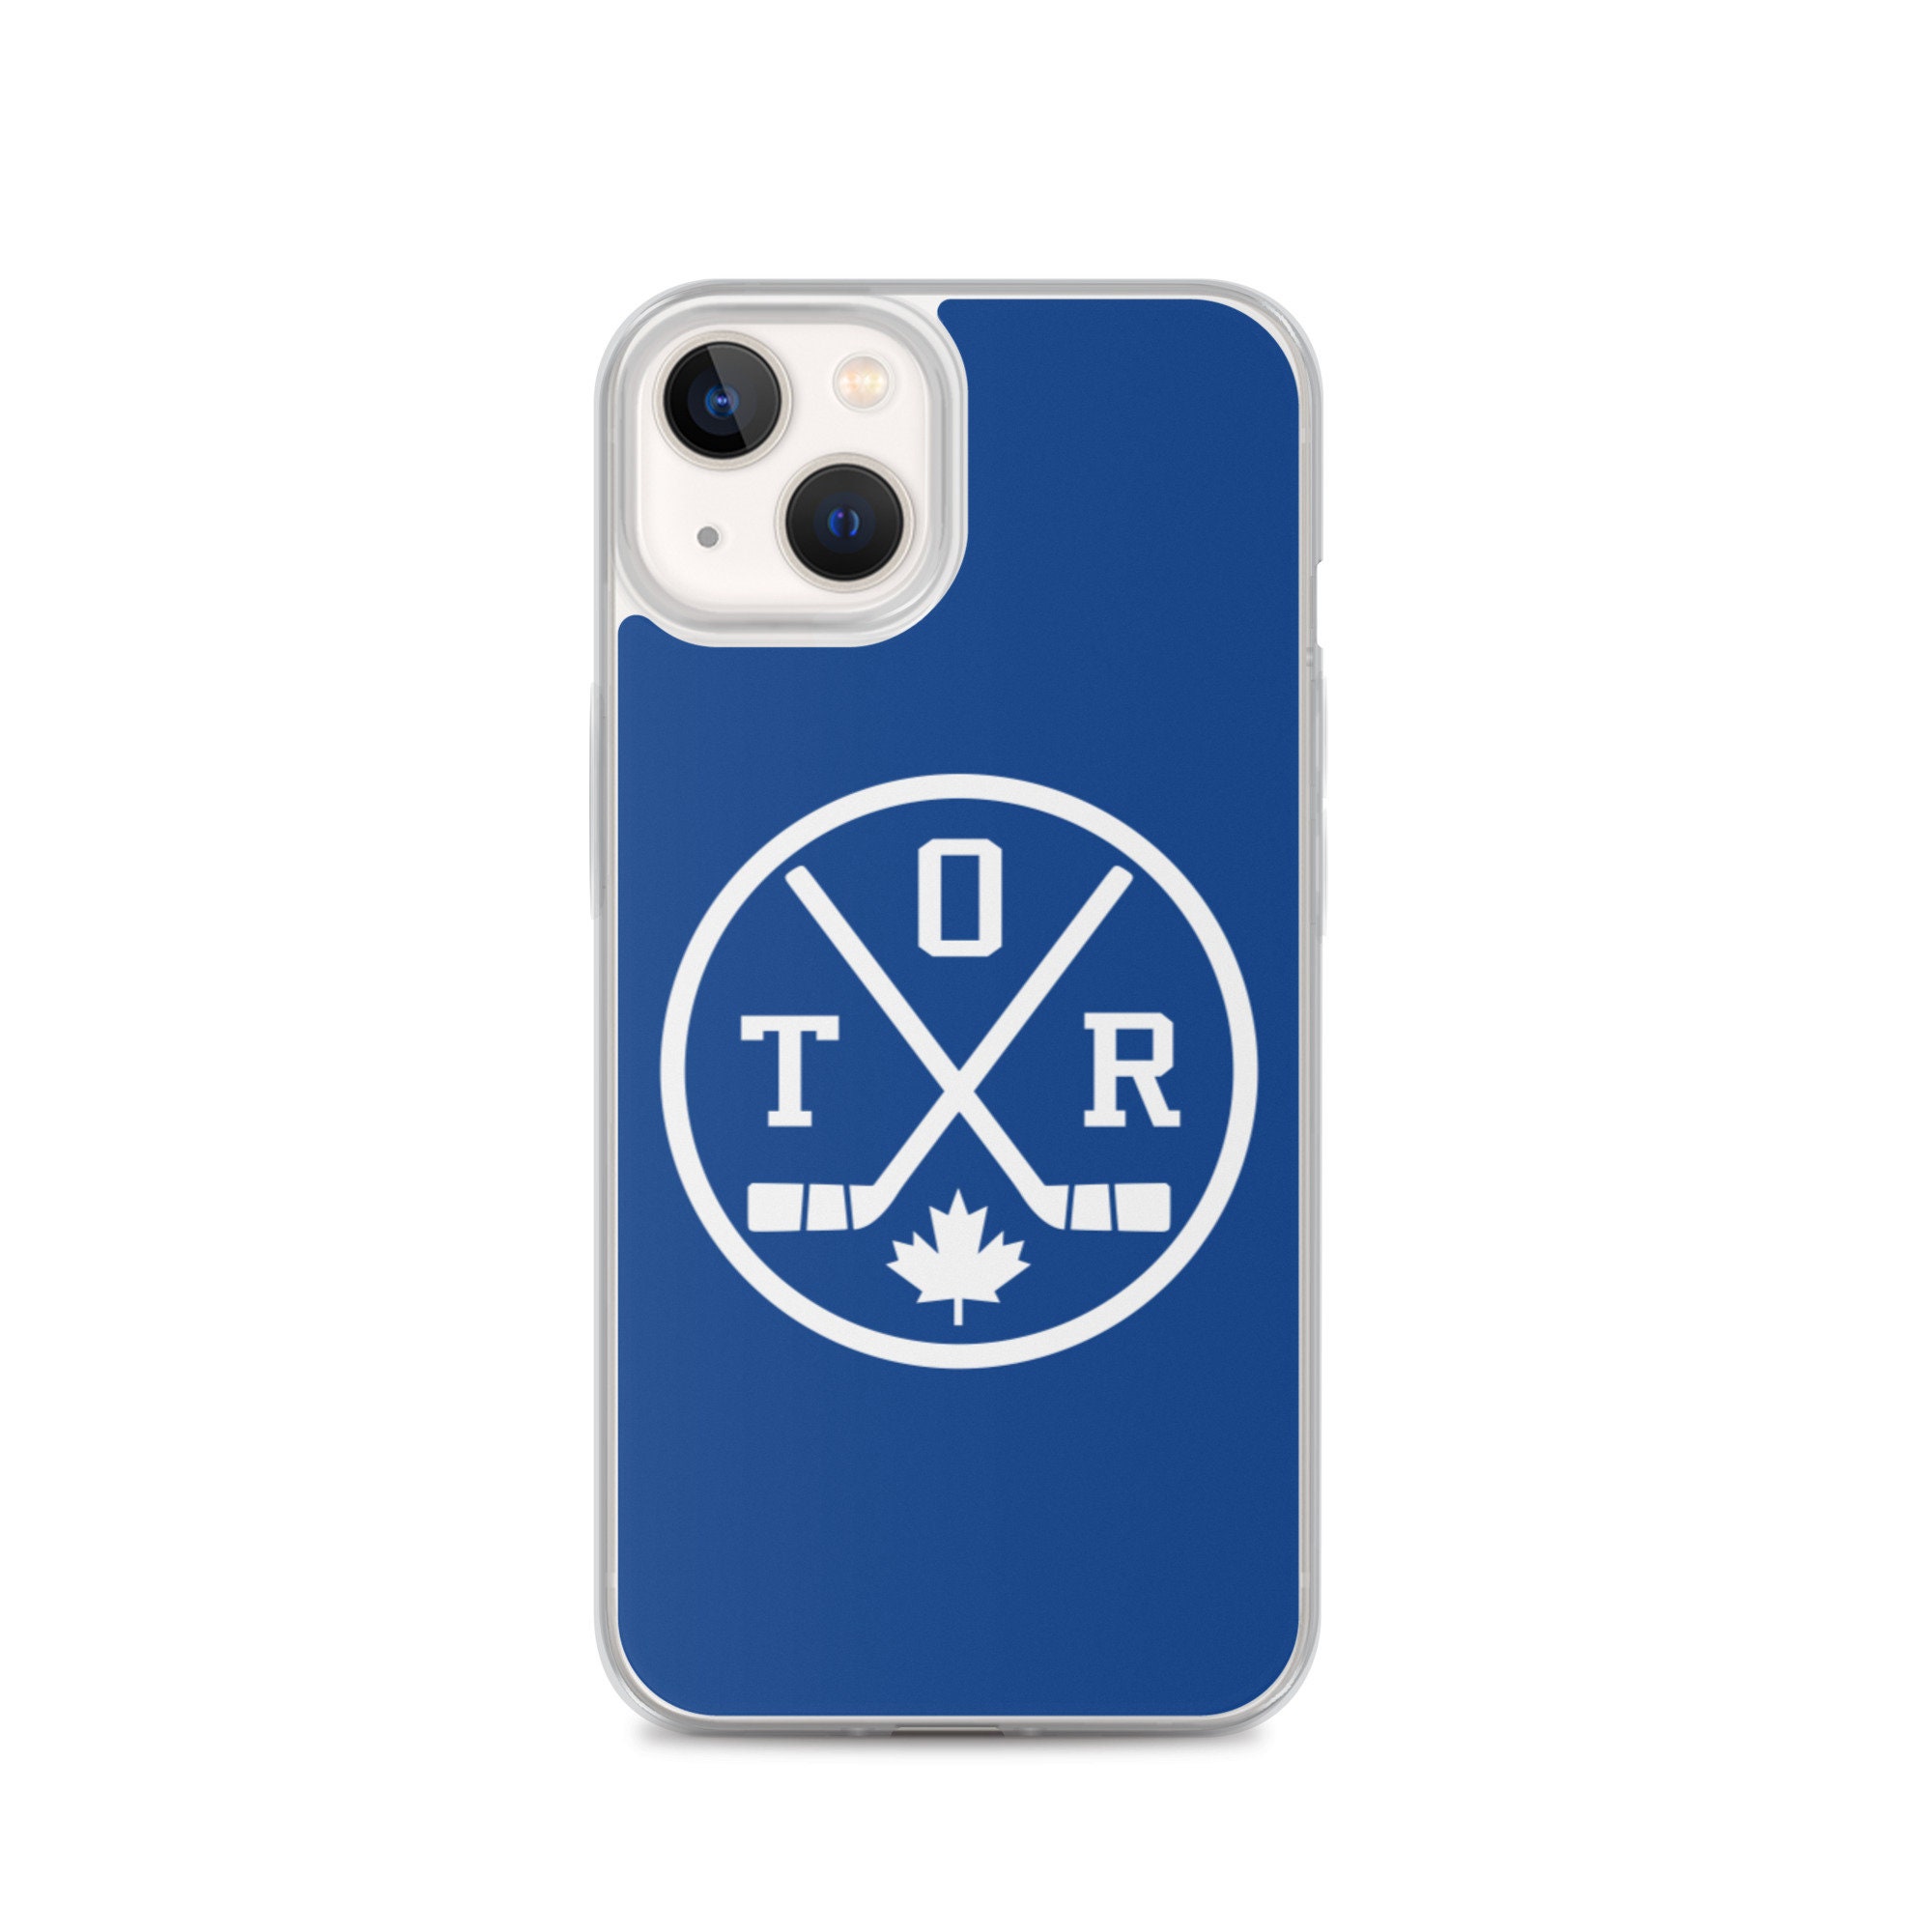 Toronto Maple Leafs Phone Cases, Maple Leafs iPhone Case, Android